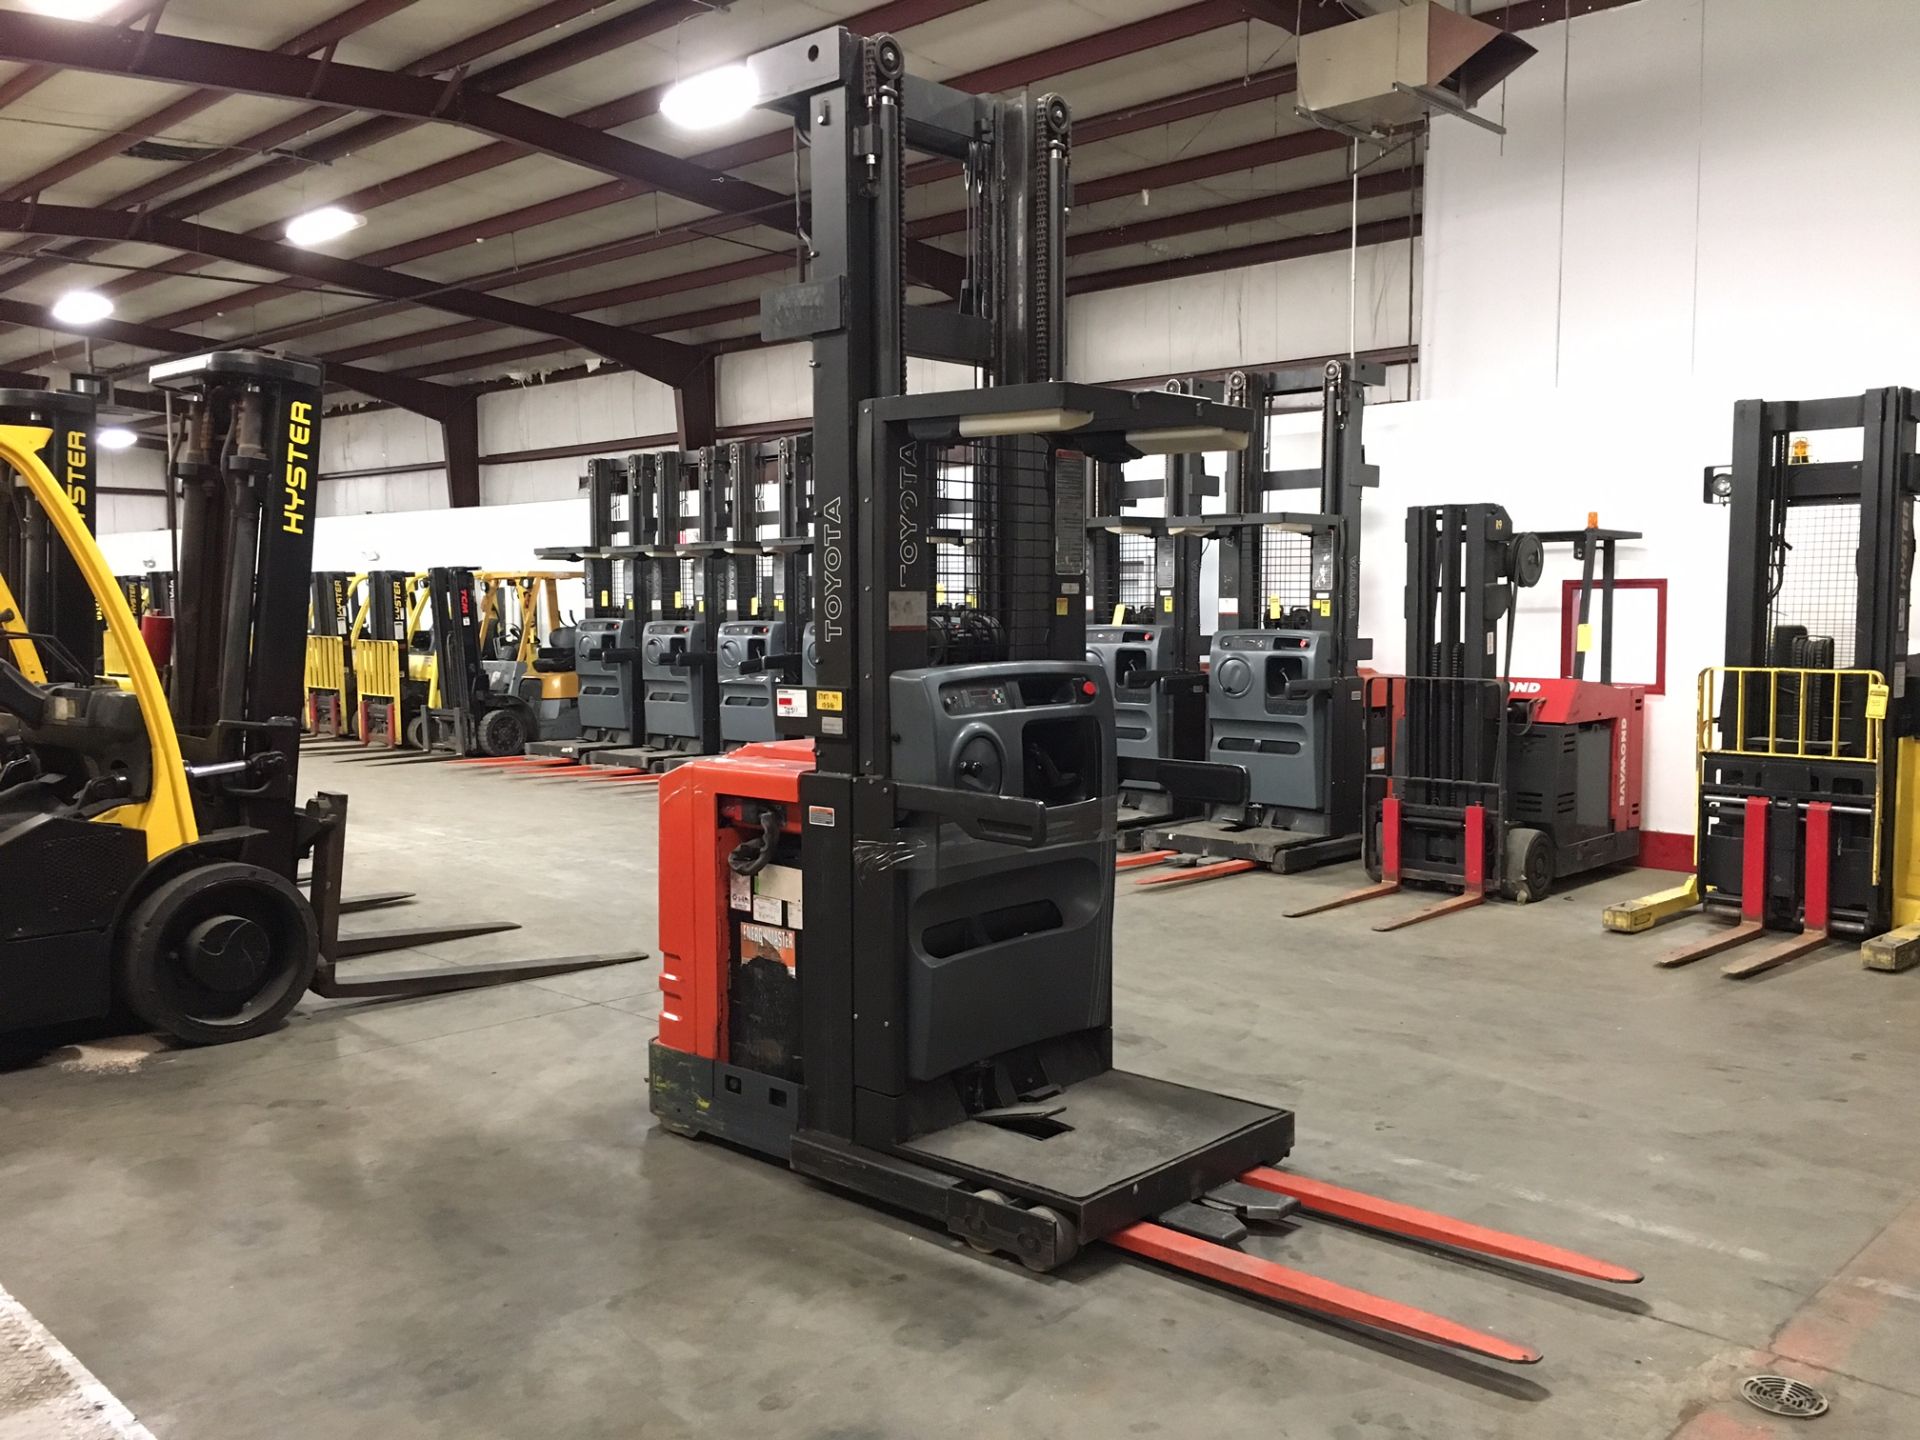 2011 TOYOTA 3,000 LB ORDER PICKER, MOD: 6BPU15, WITH 24-VOLT BATTERY, 300" RAISED, 1,231 DRIVE HOURS - Image 3 of 5